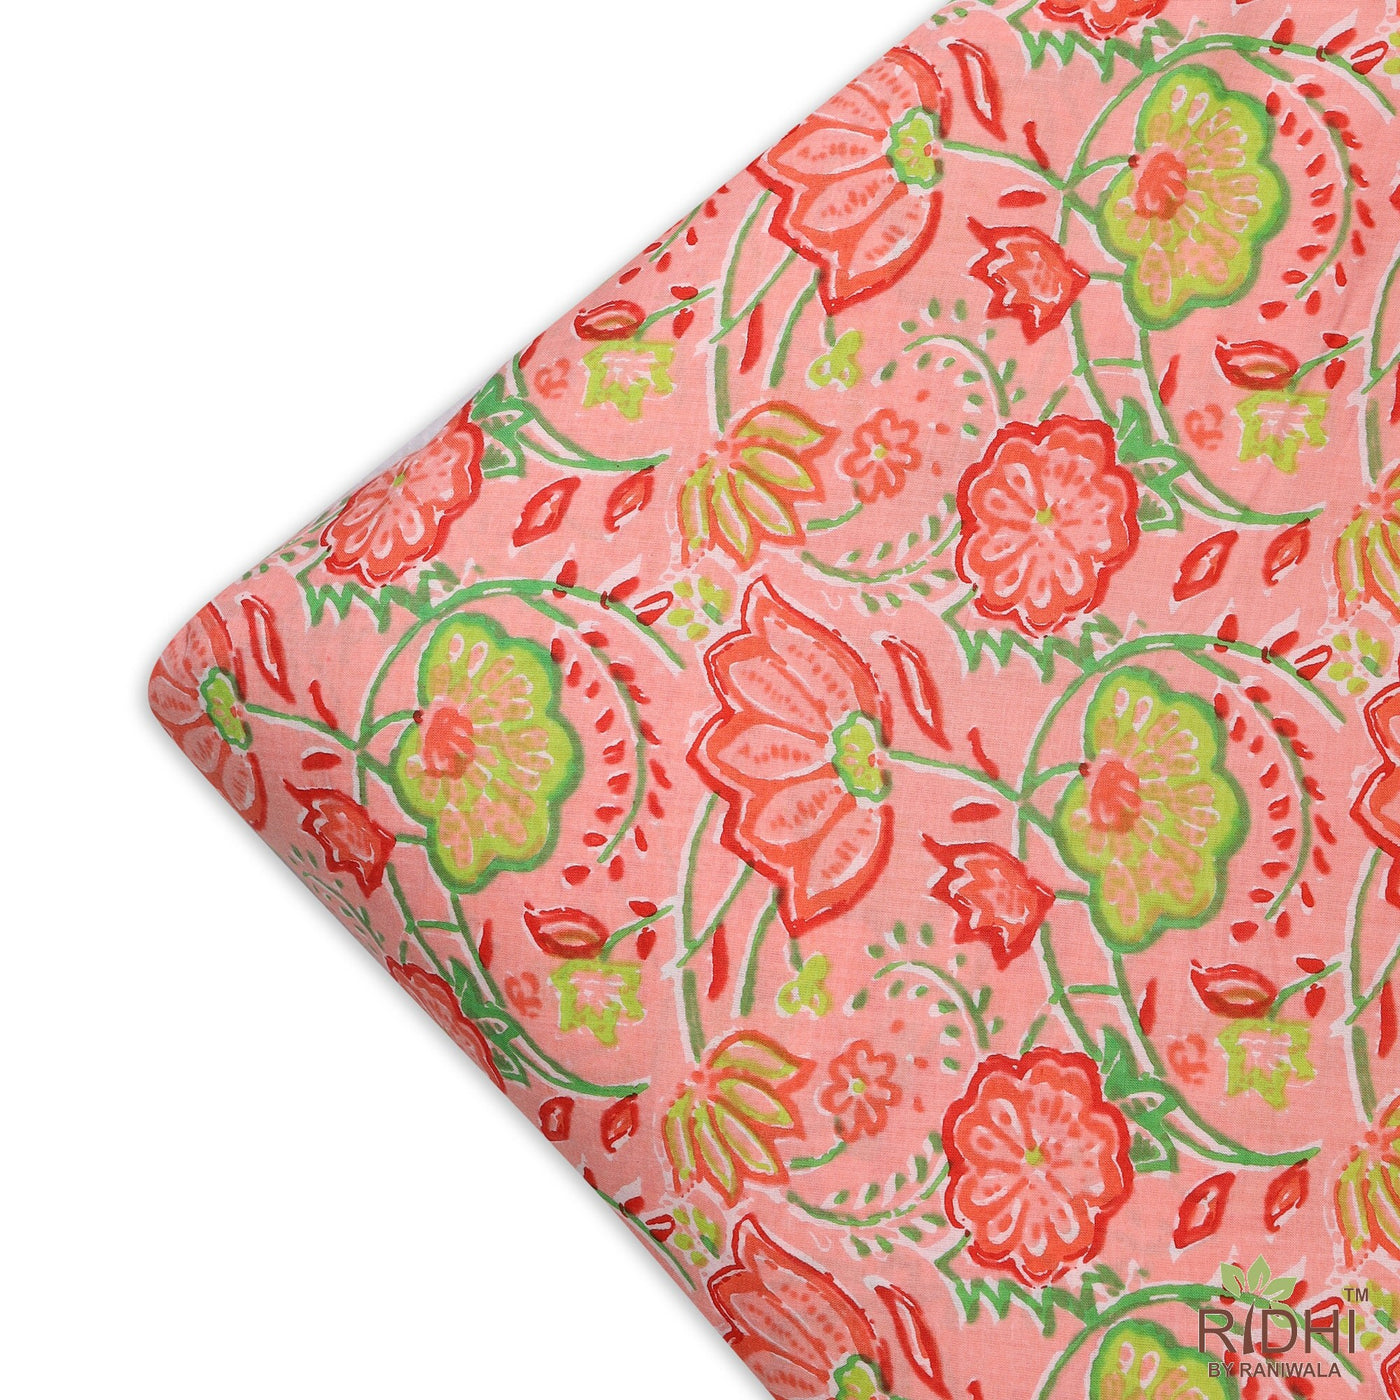 Fabricrush Coral Pink, Forest and Kelly Green Indian Floral Printed 100% Pure Cotton Cloth, Fabric by the yard, Women's Clothing Curtains Pillows Bags